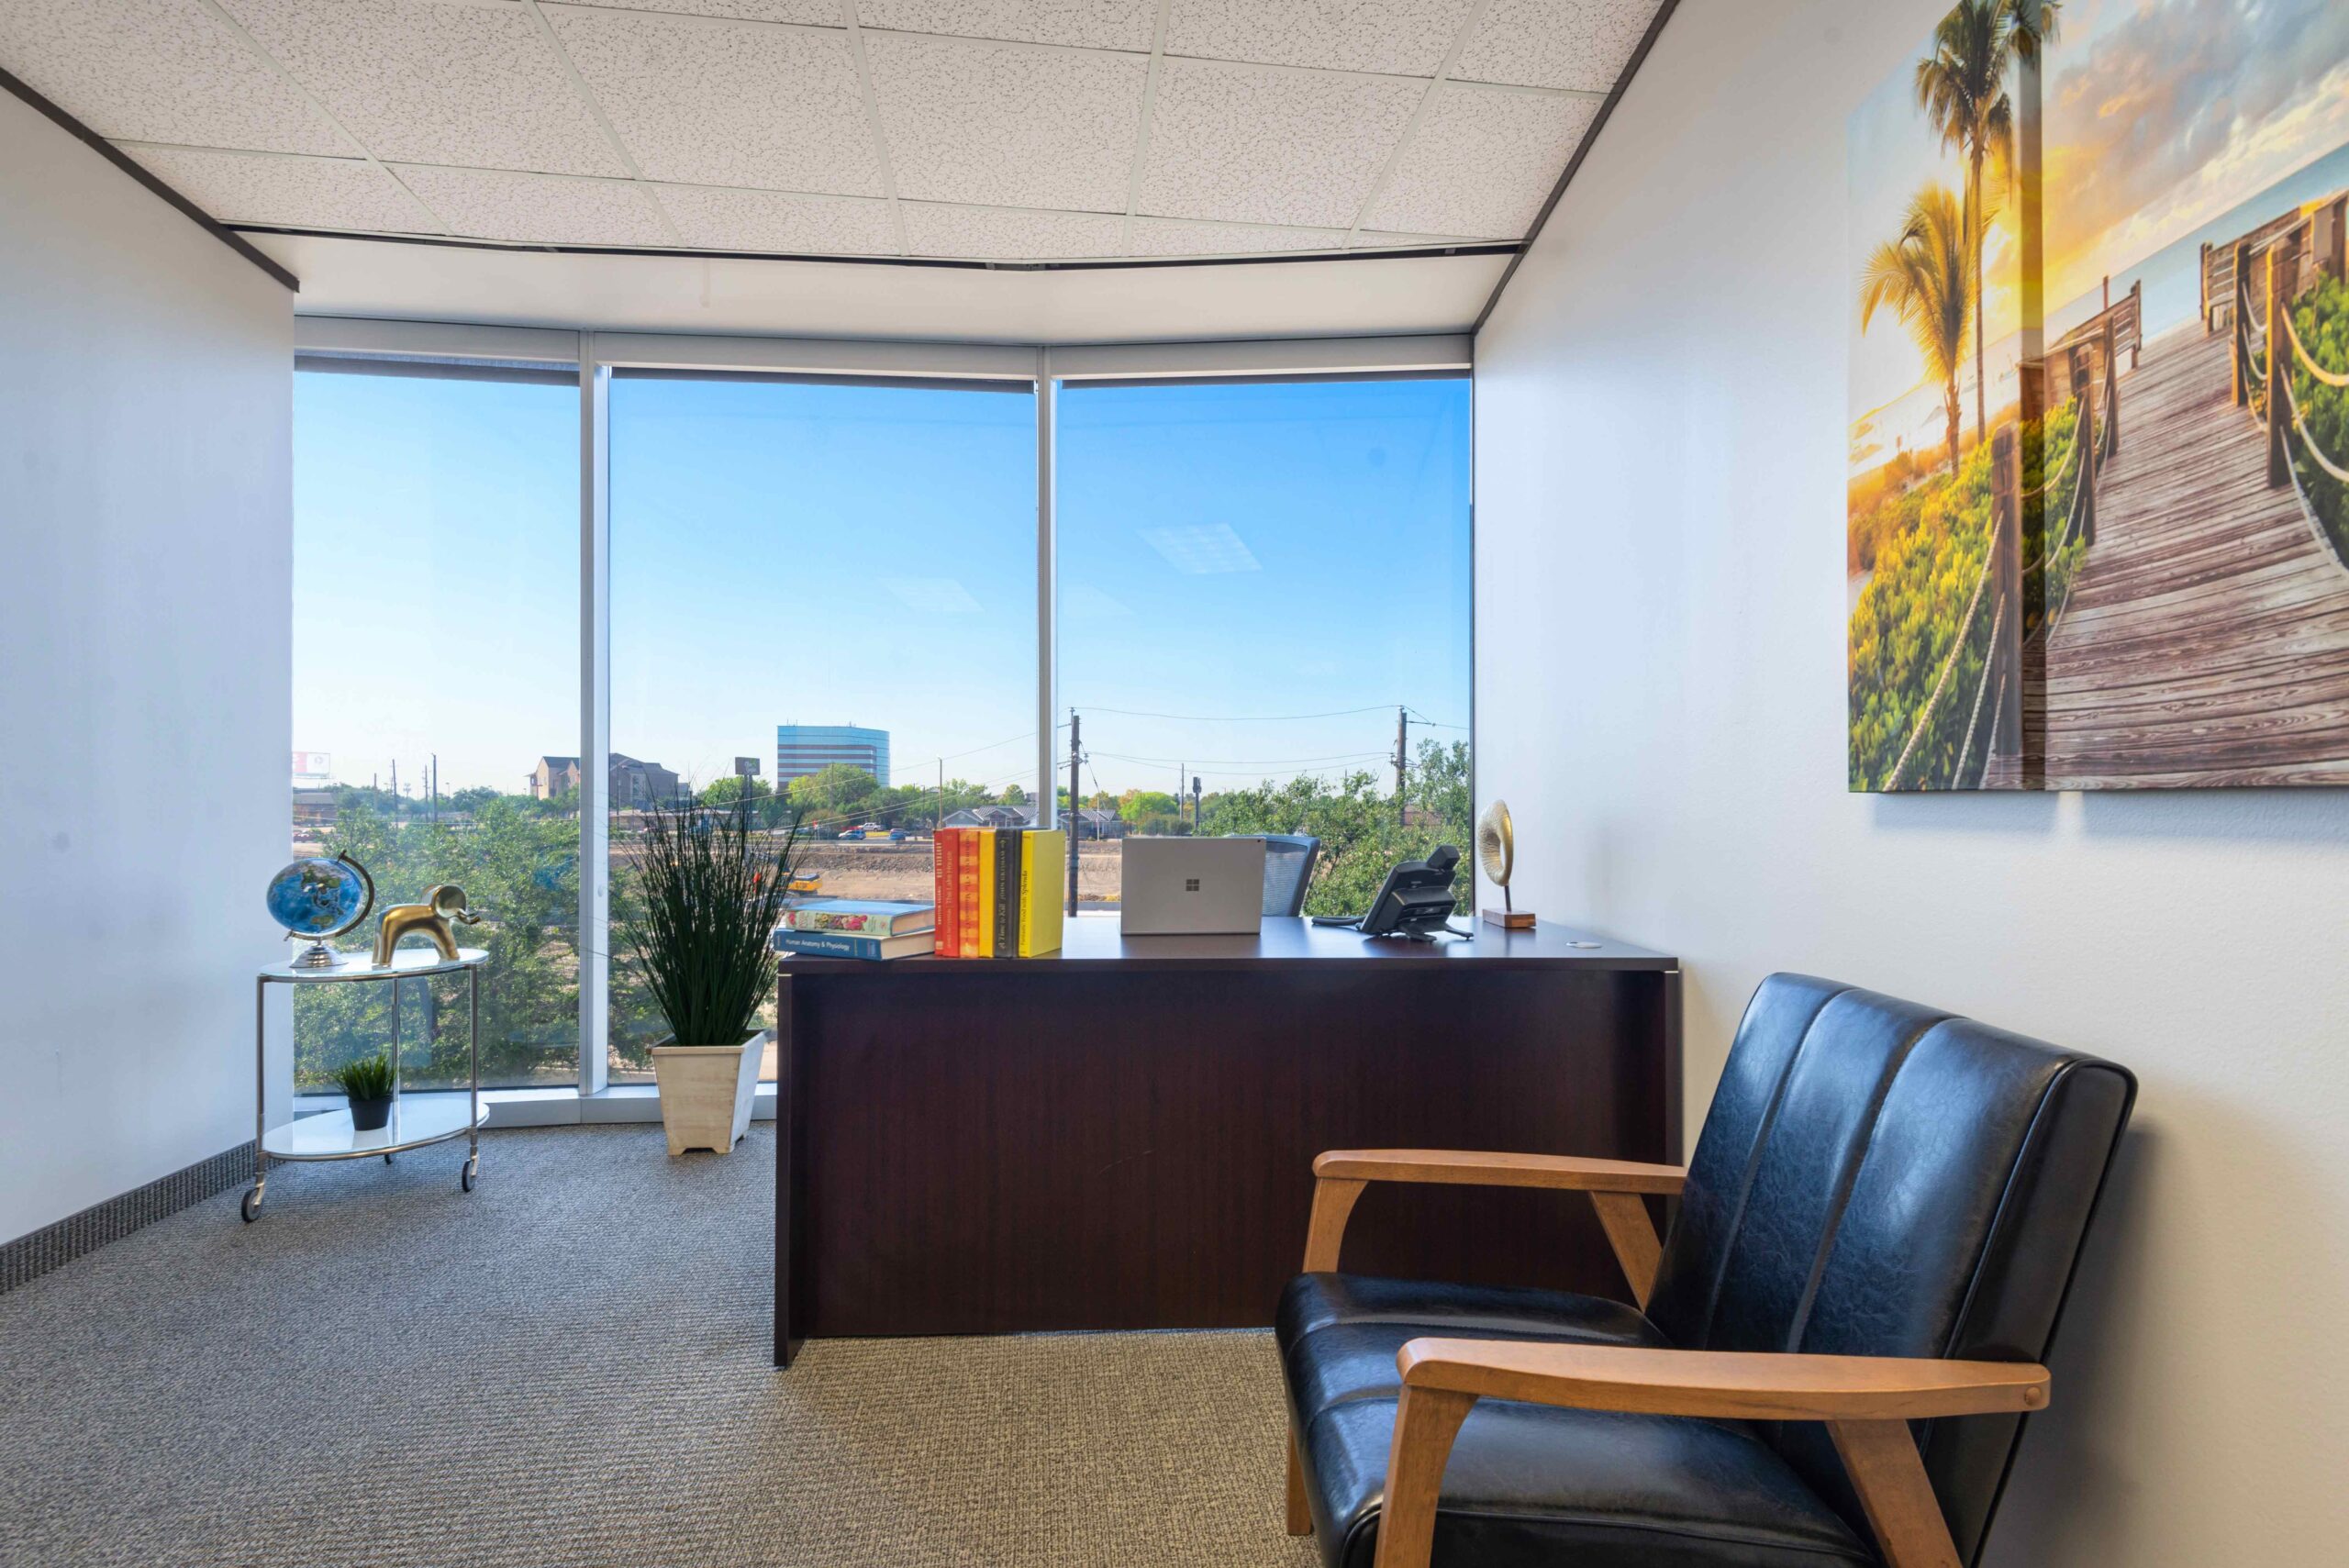 Office space in North Dallas with desk, futon, floor to ceiling windows and natural light.